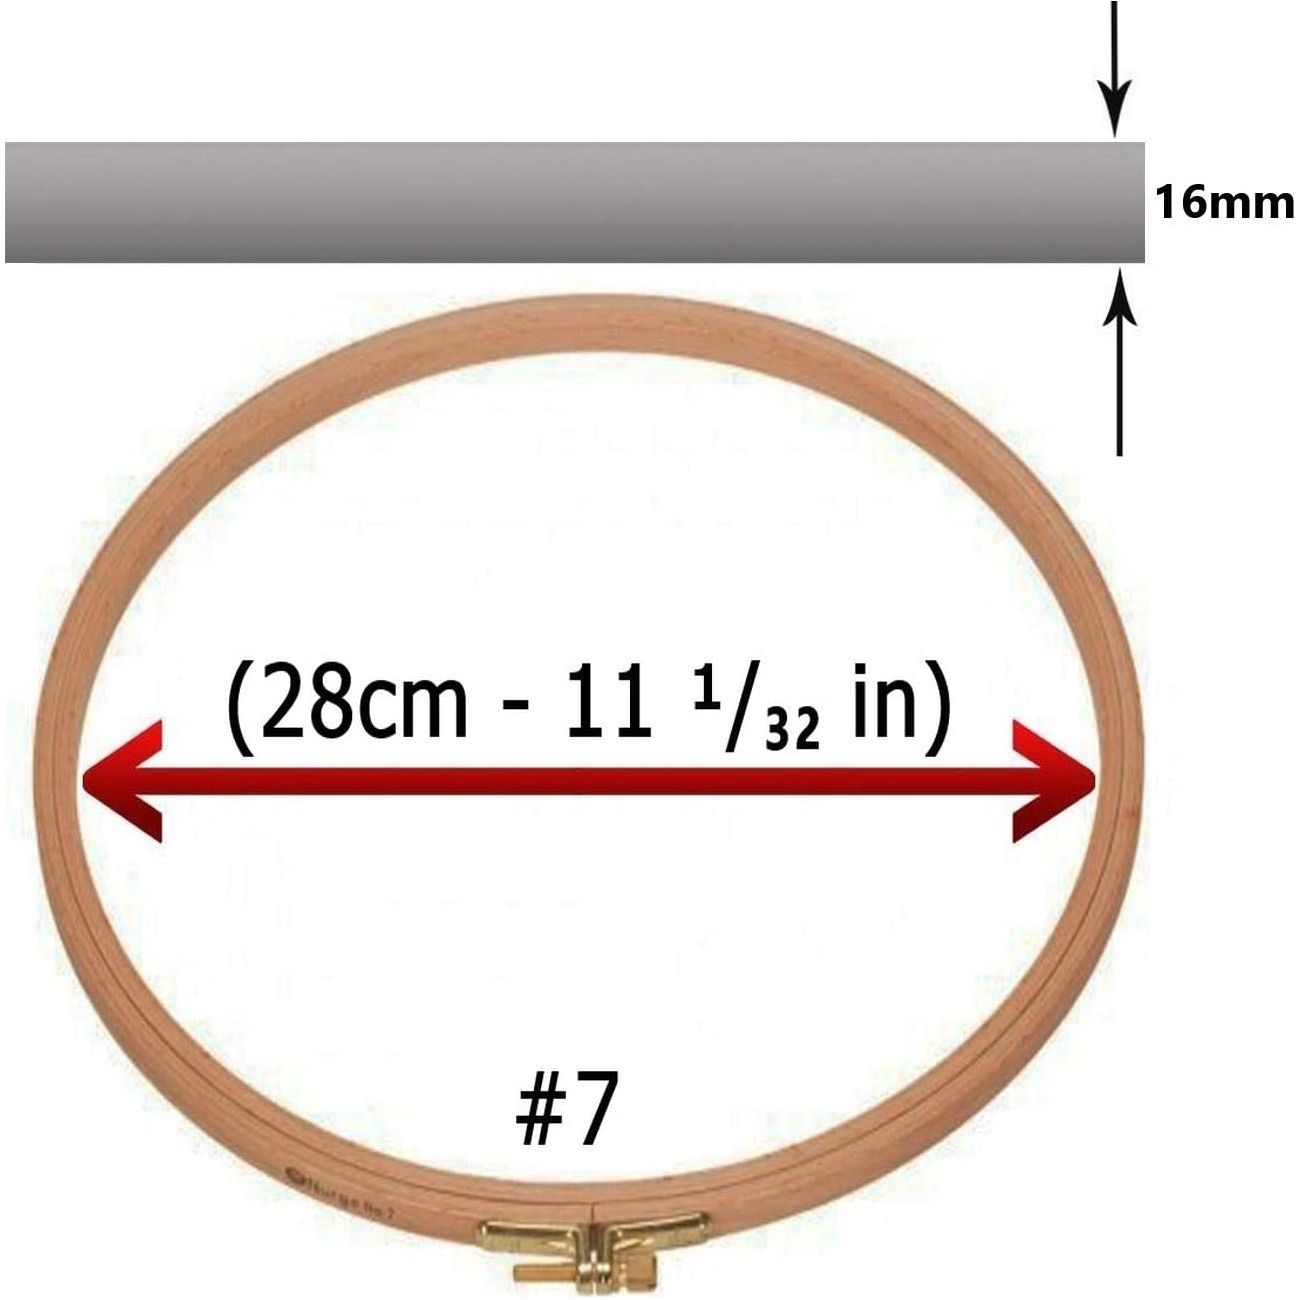 natural beech wood round quilt 16mm embroidery hoop 28cm - 11 ¹/₃₂ in